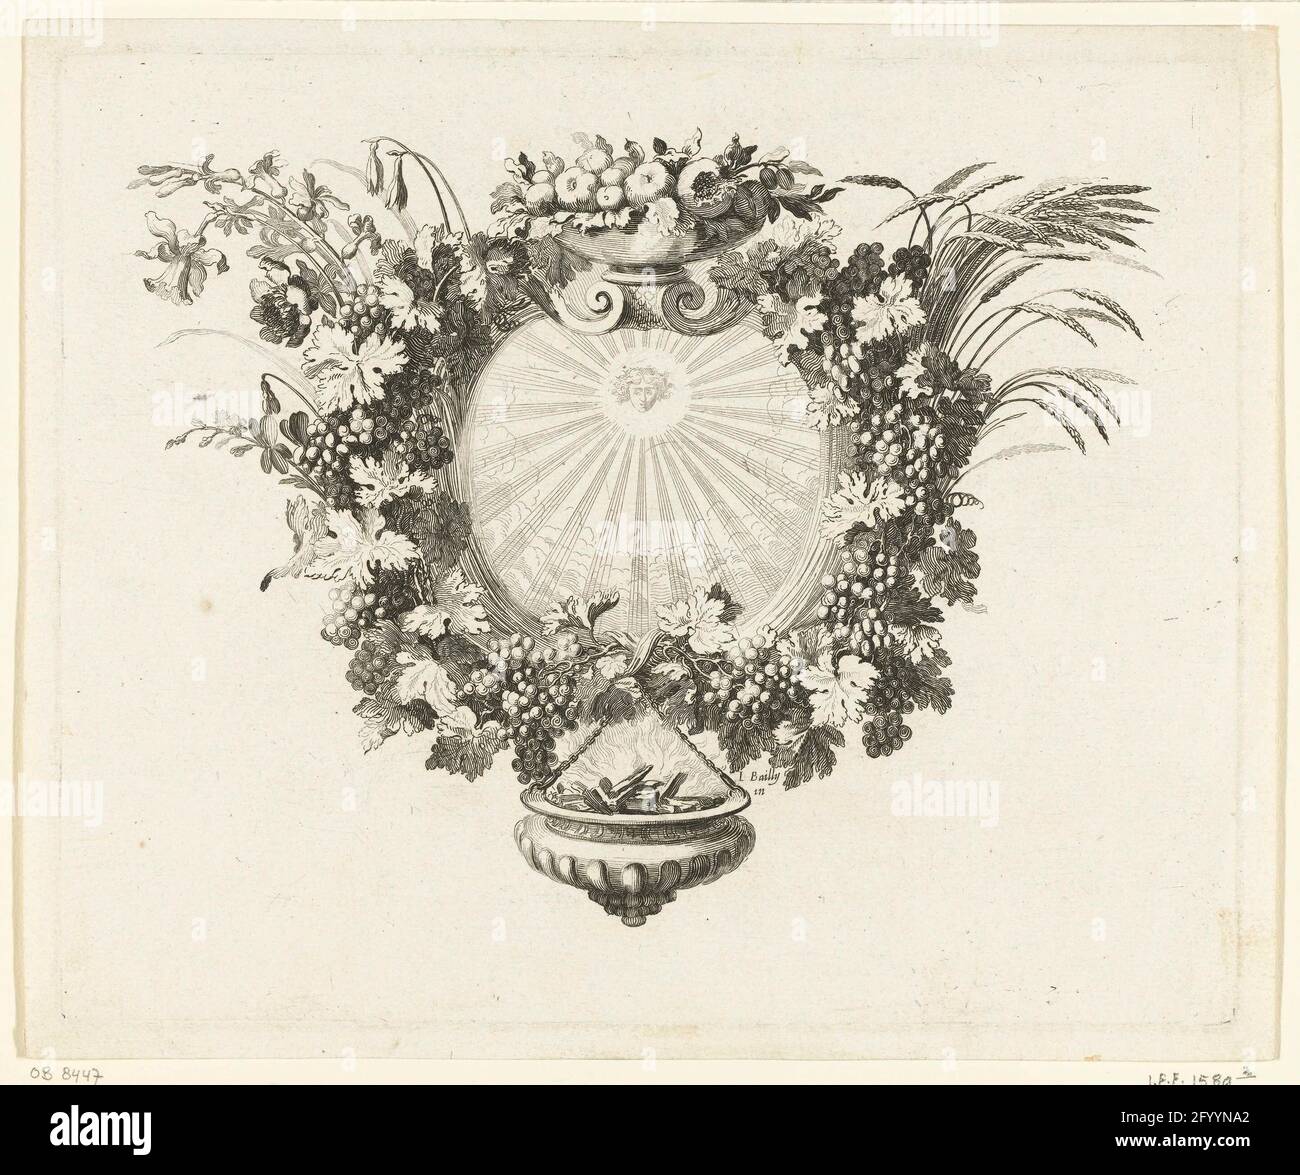 Cul-de-Lampe with four seasons; Tapisseries du Roi, Ou Sont Représentez Les Quatre Elienens et les Quatre Saisons. A representation of the air with the head of a sun god, surrounded by four vines, from which flowers sticks (spring) on the left and corners (summer) on the straight side. On top of the frame is a bowl of fruit (fall) and below hangs a stew with burning coals (winter). Stock Photo